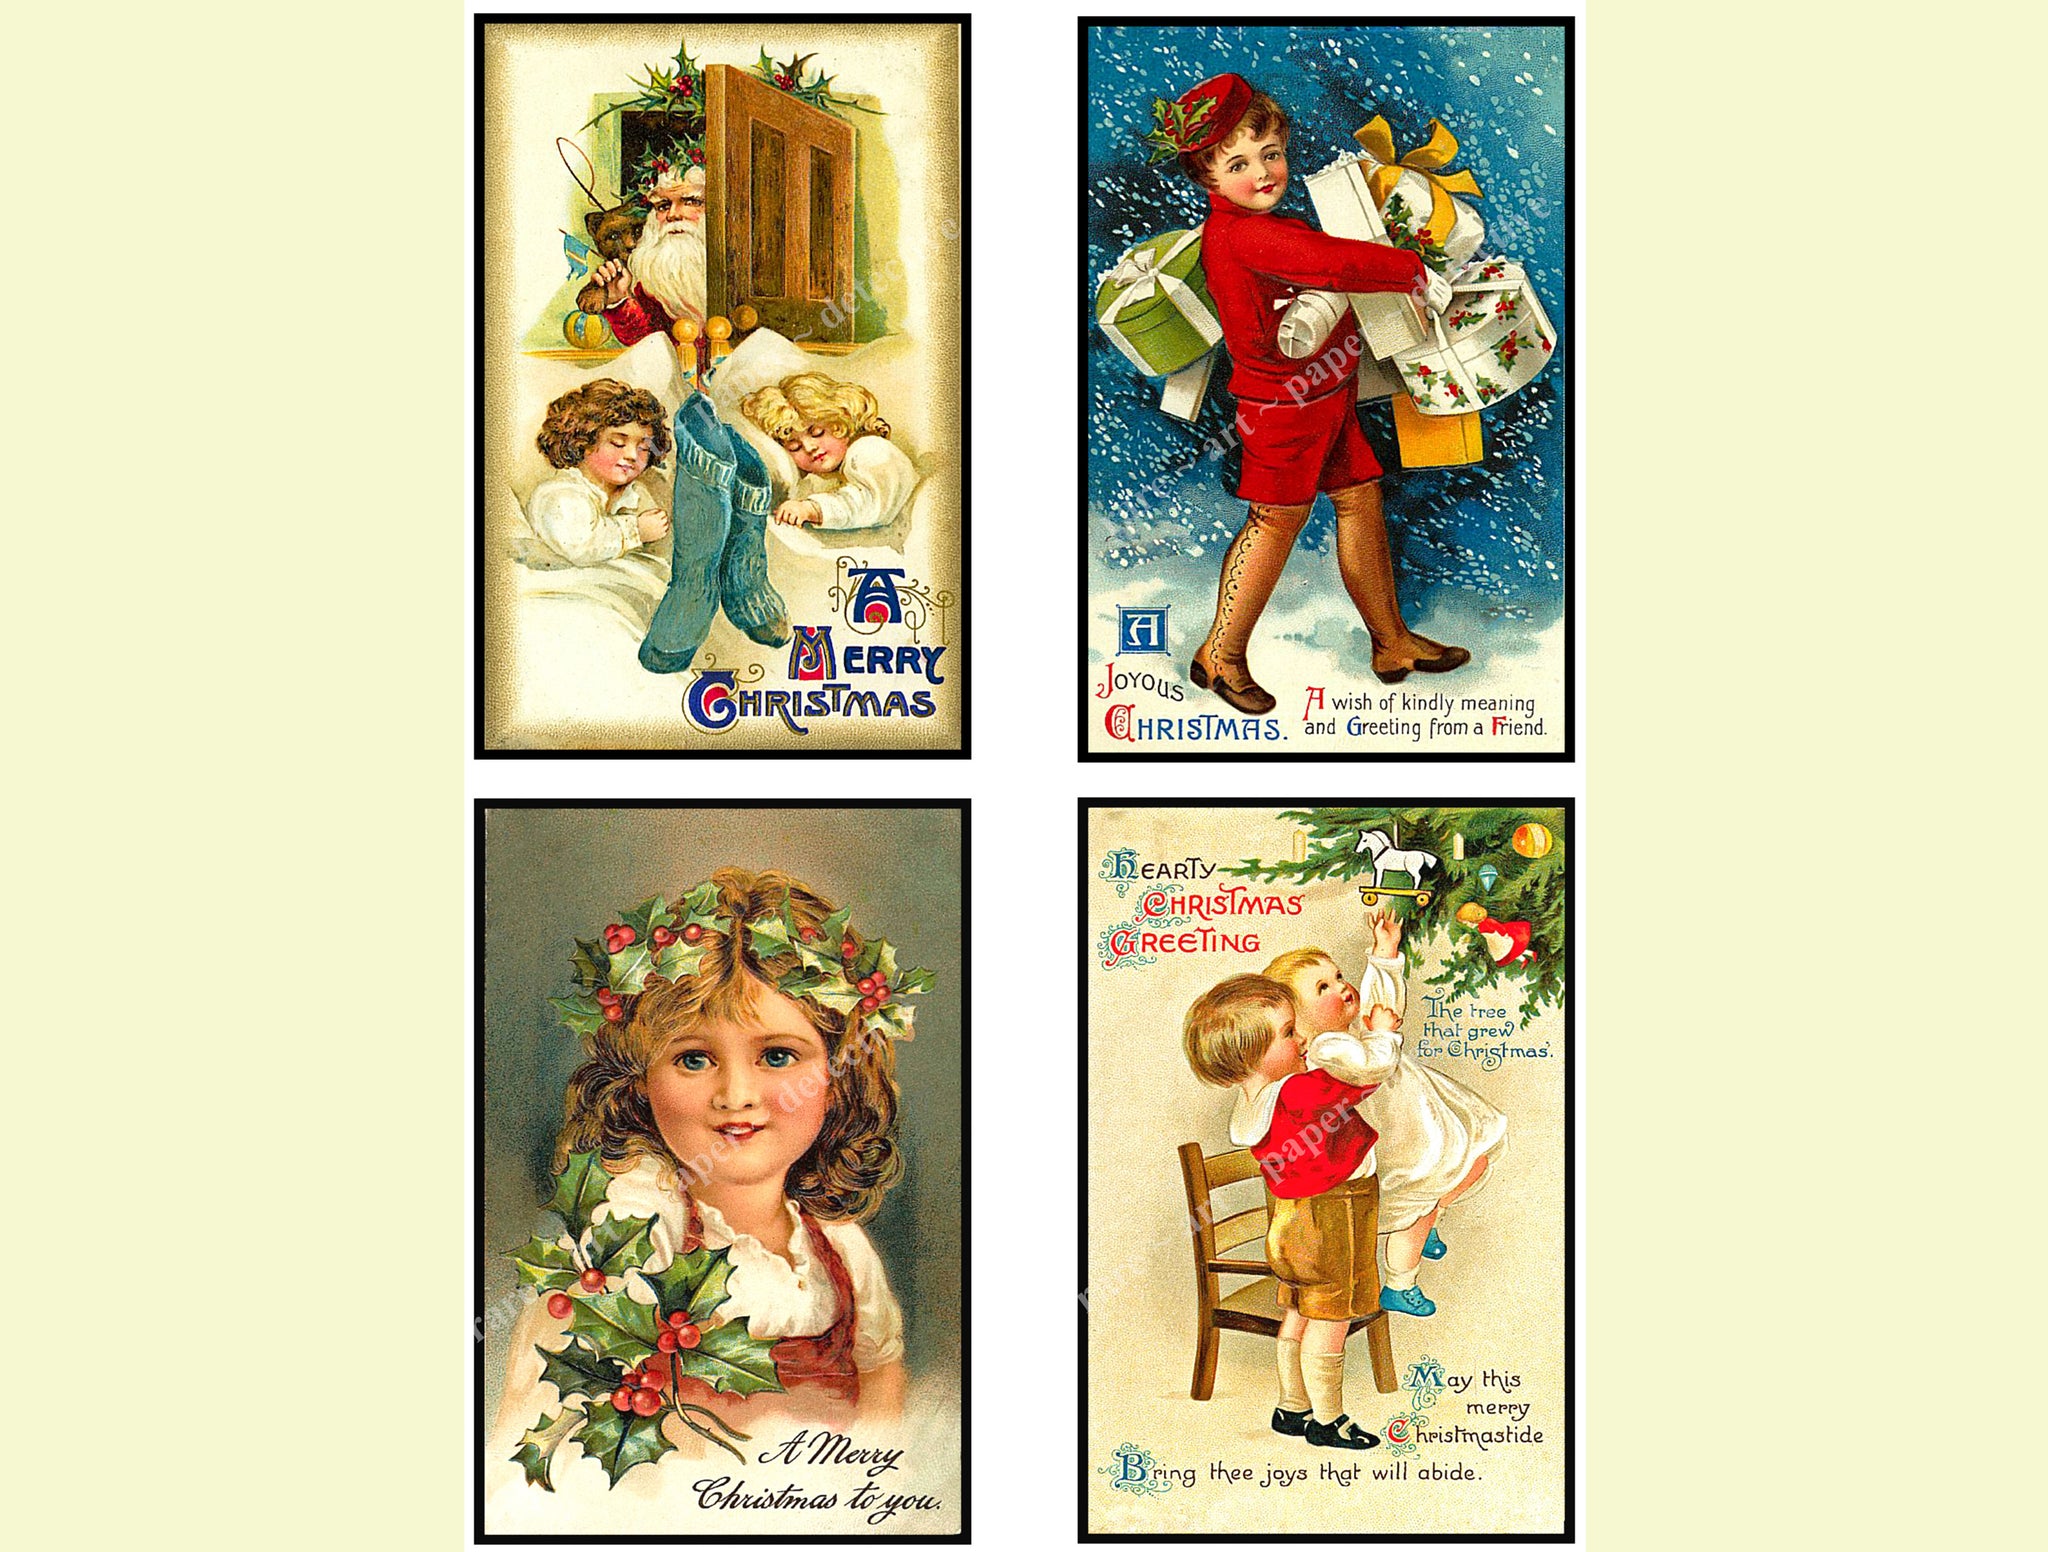 Victorian Christmas Postcard Stickers, 4 Pcs. Set of Old Fashioned Postcard Images, 3.25" x 5" each, 1028